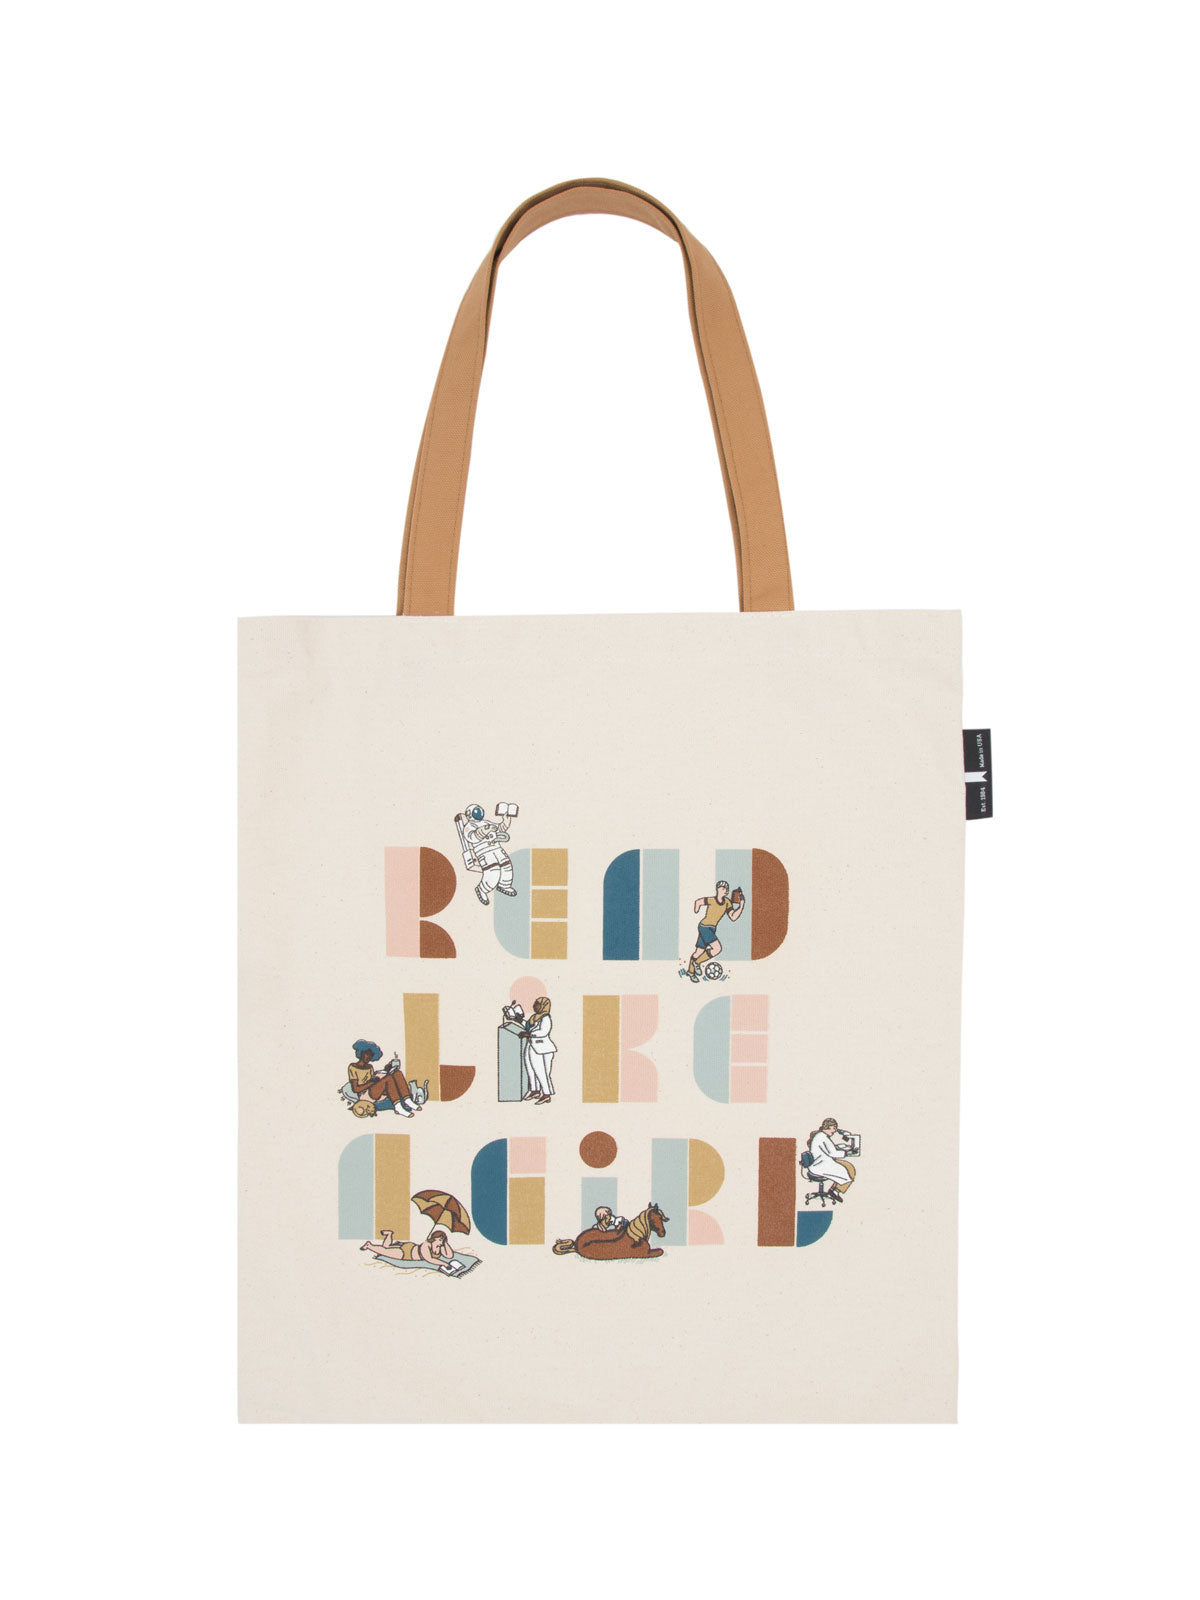 This girl loves her fill in the blank tote bag